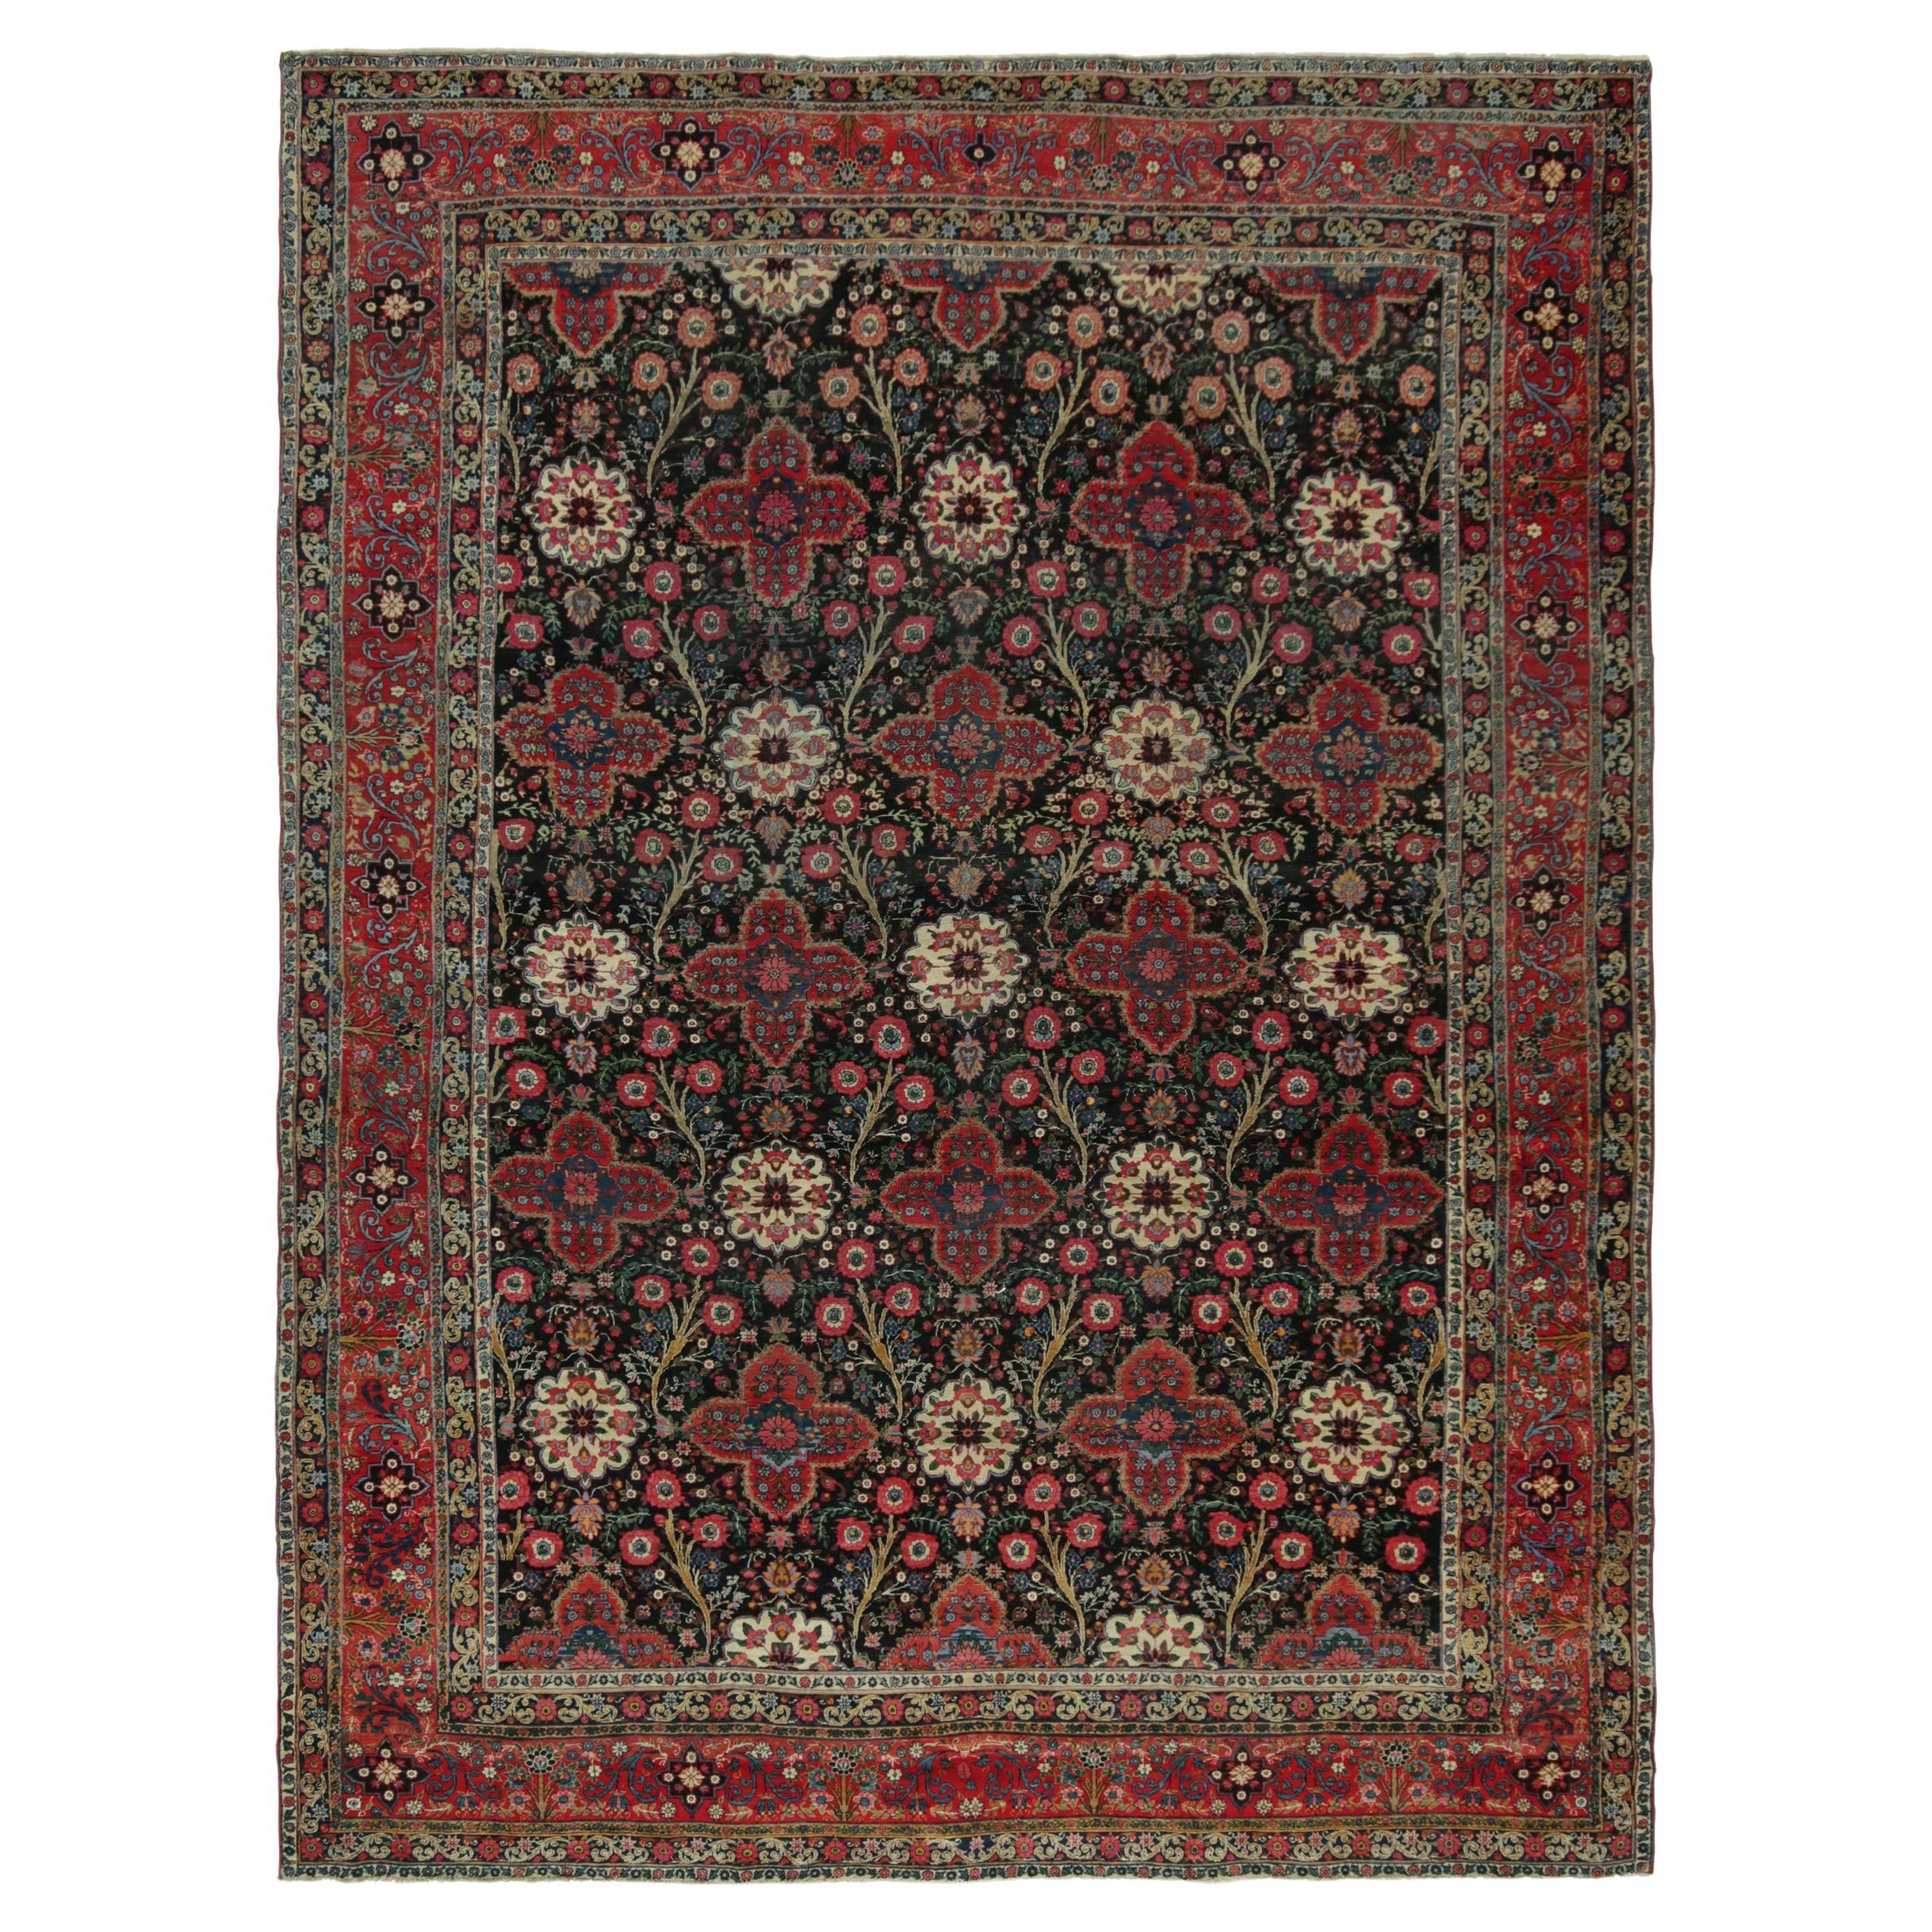 Antique Persian Rug in Black with Red Floral Patterns - by Rug & Kilim